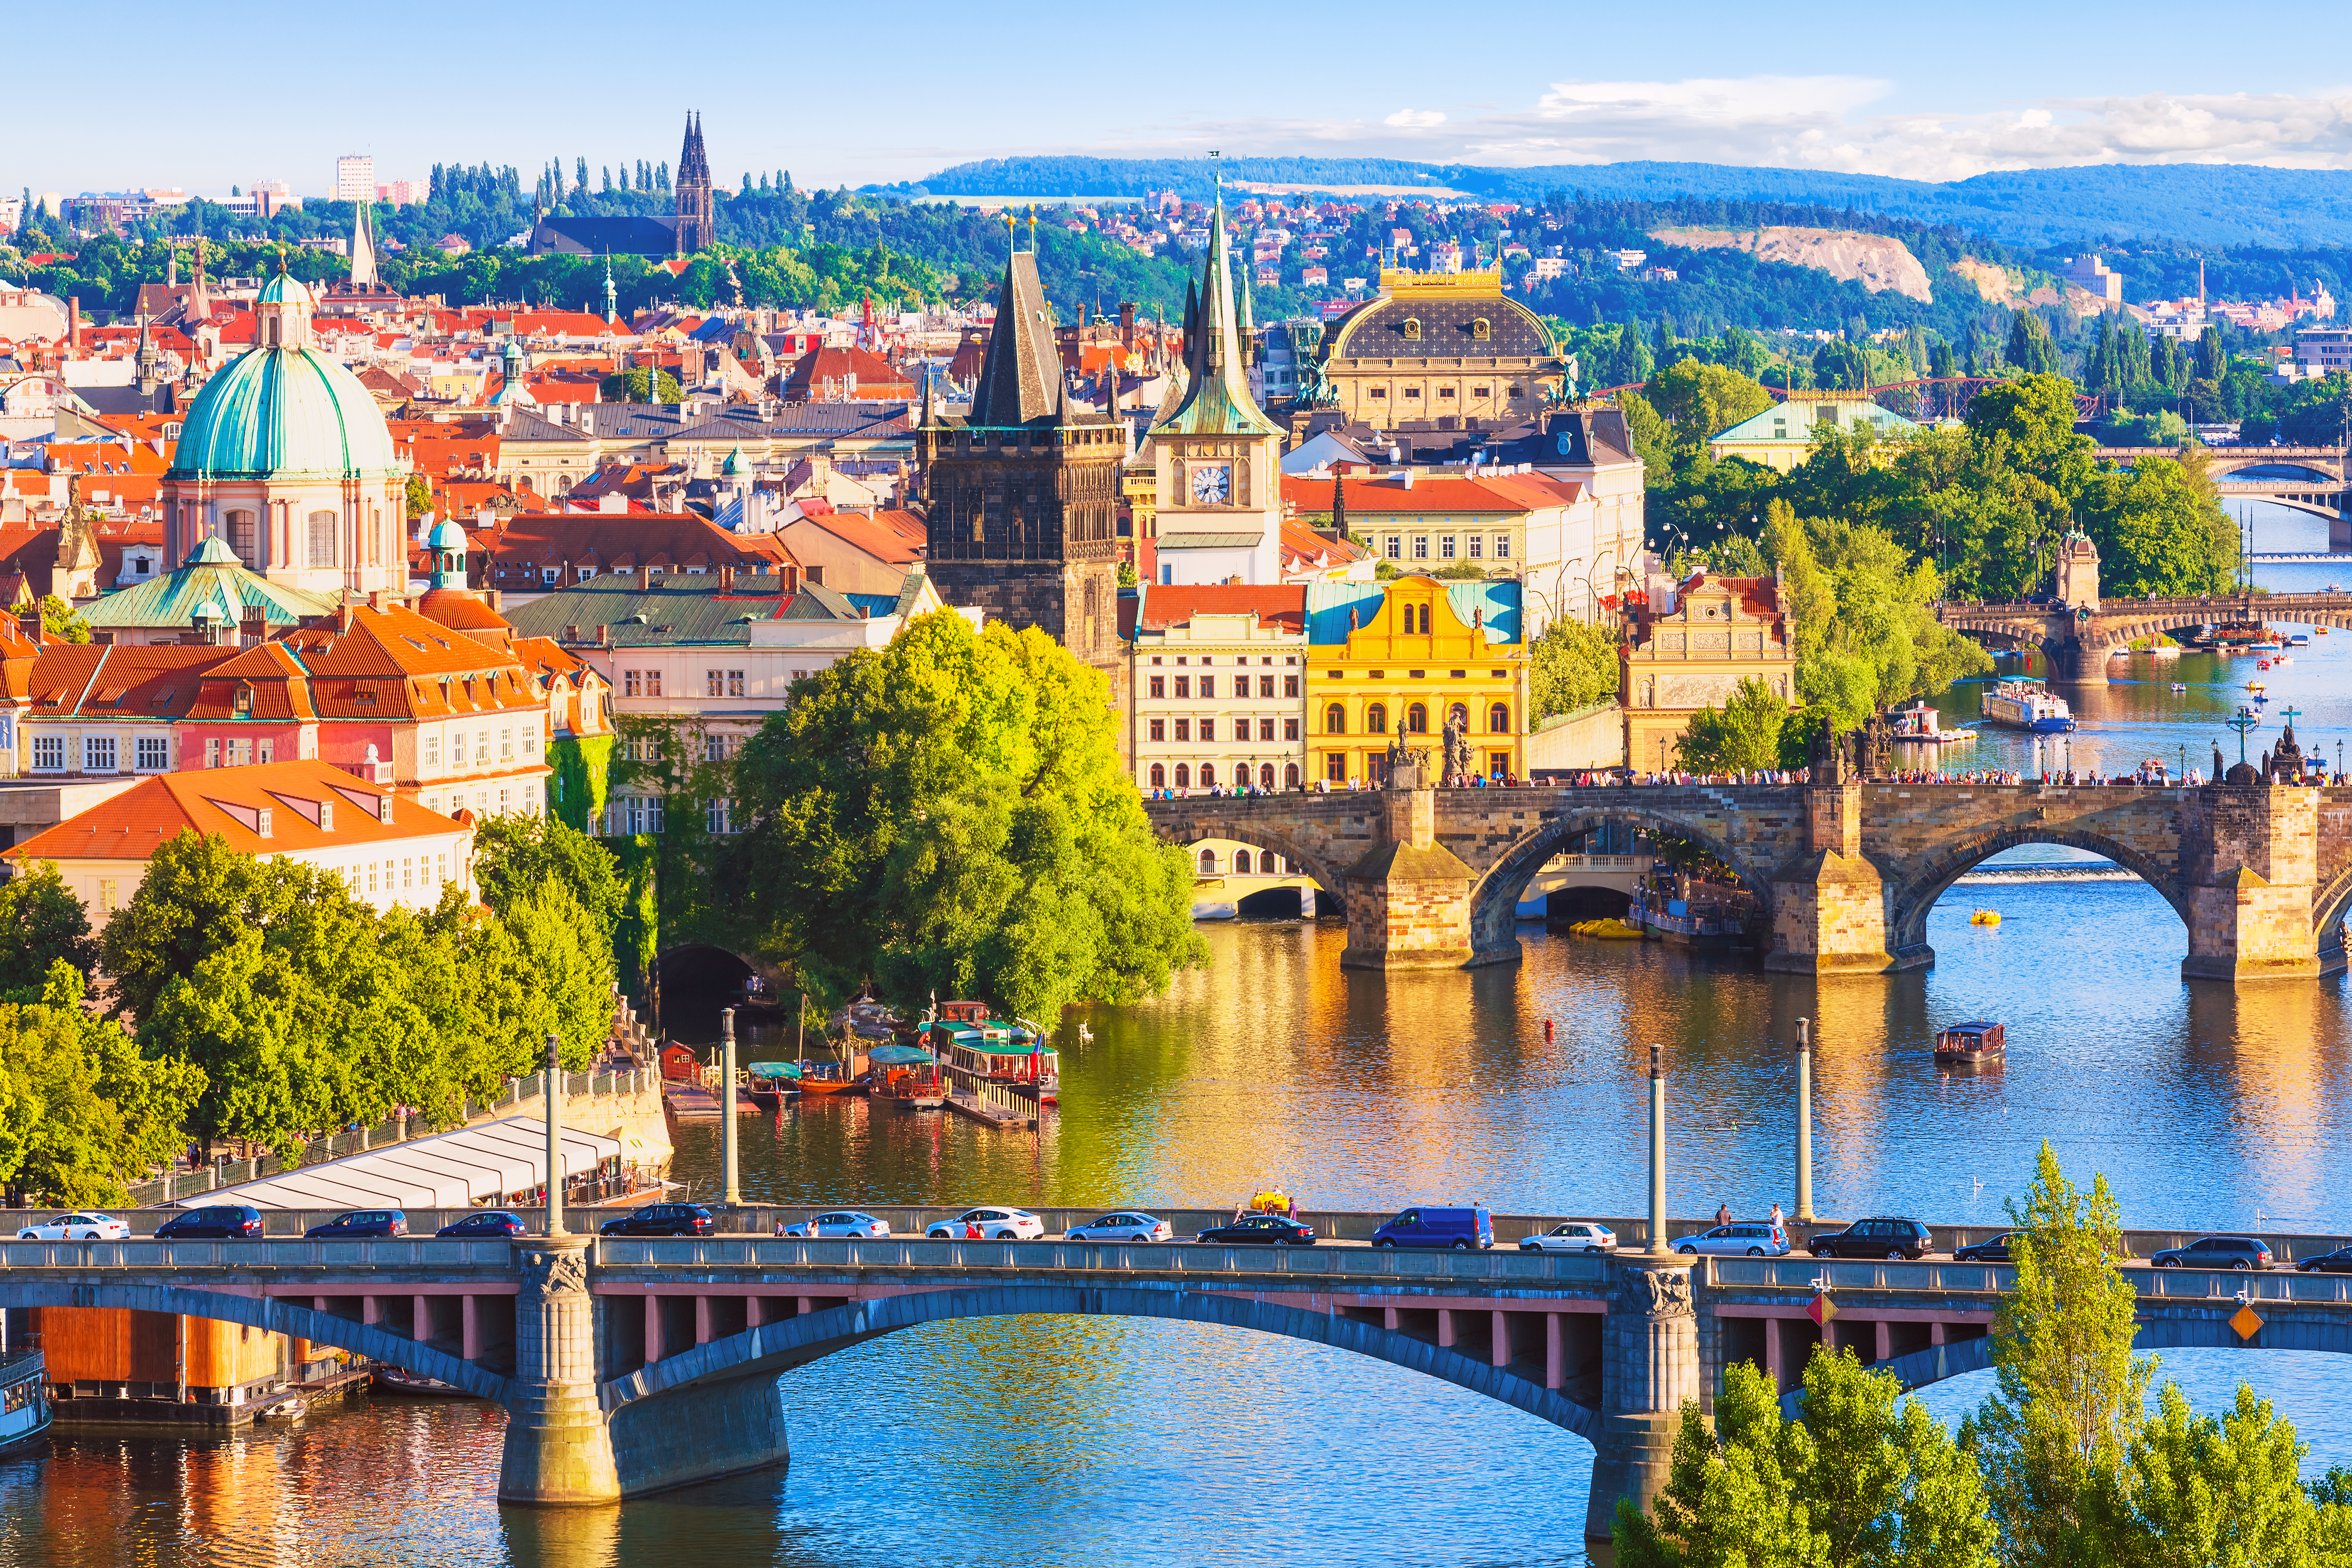 Prague, known as the city of a hundred towers, is so rich in architecture that its entire historic heart is a World Heritage Site. Running in Prague means getting lost in a maze of streets and squares surrounded by baroque buildings.